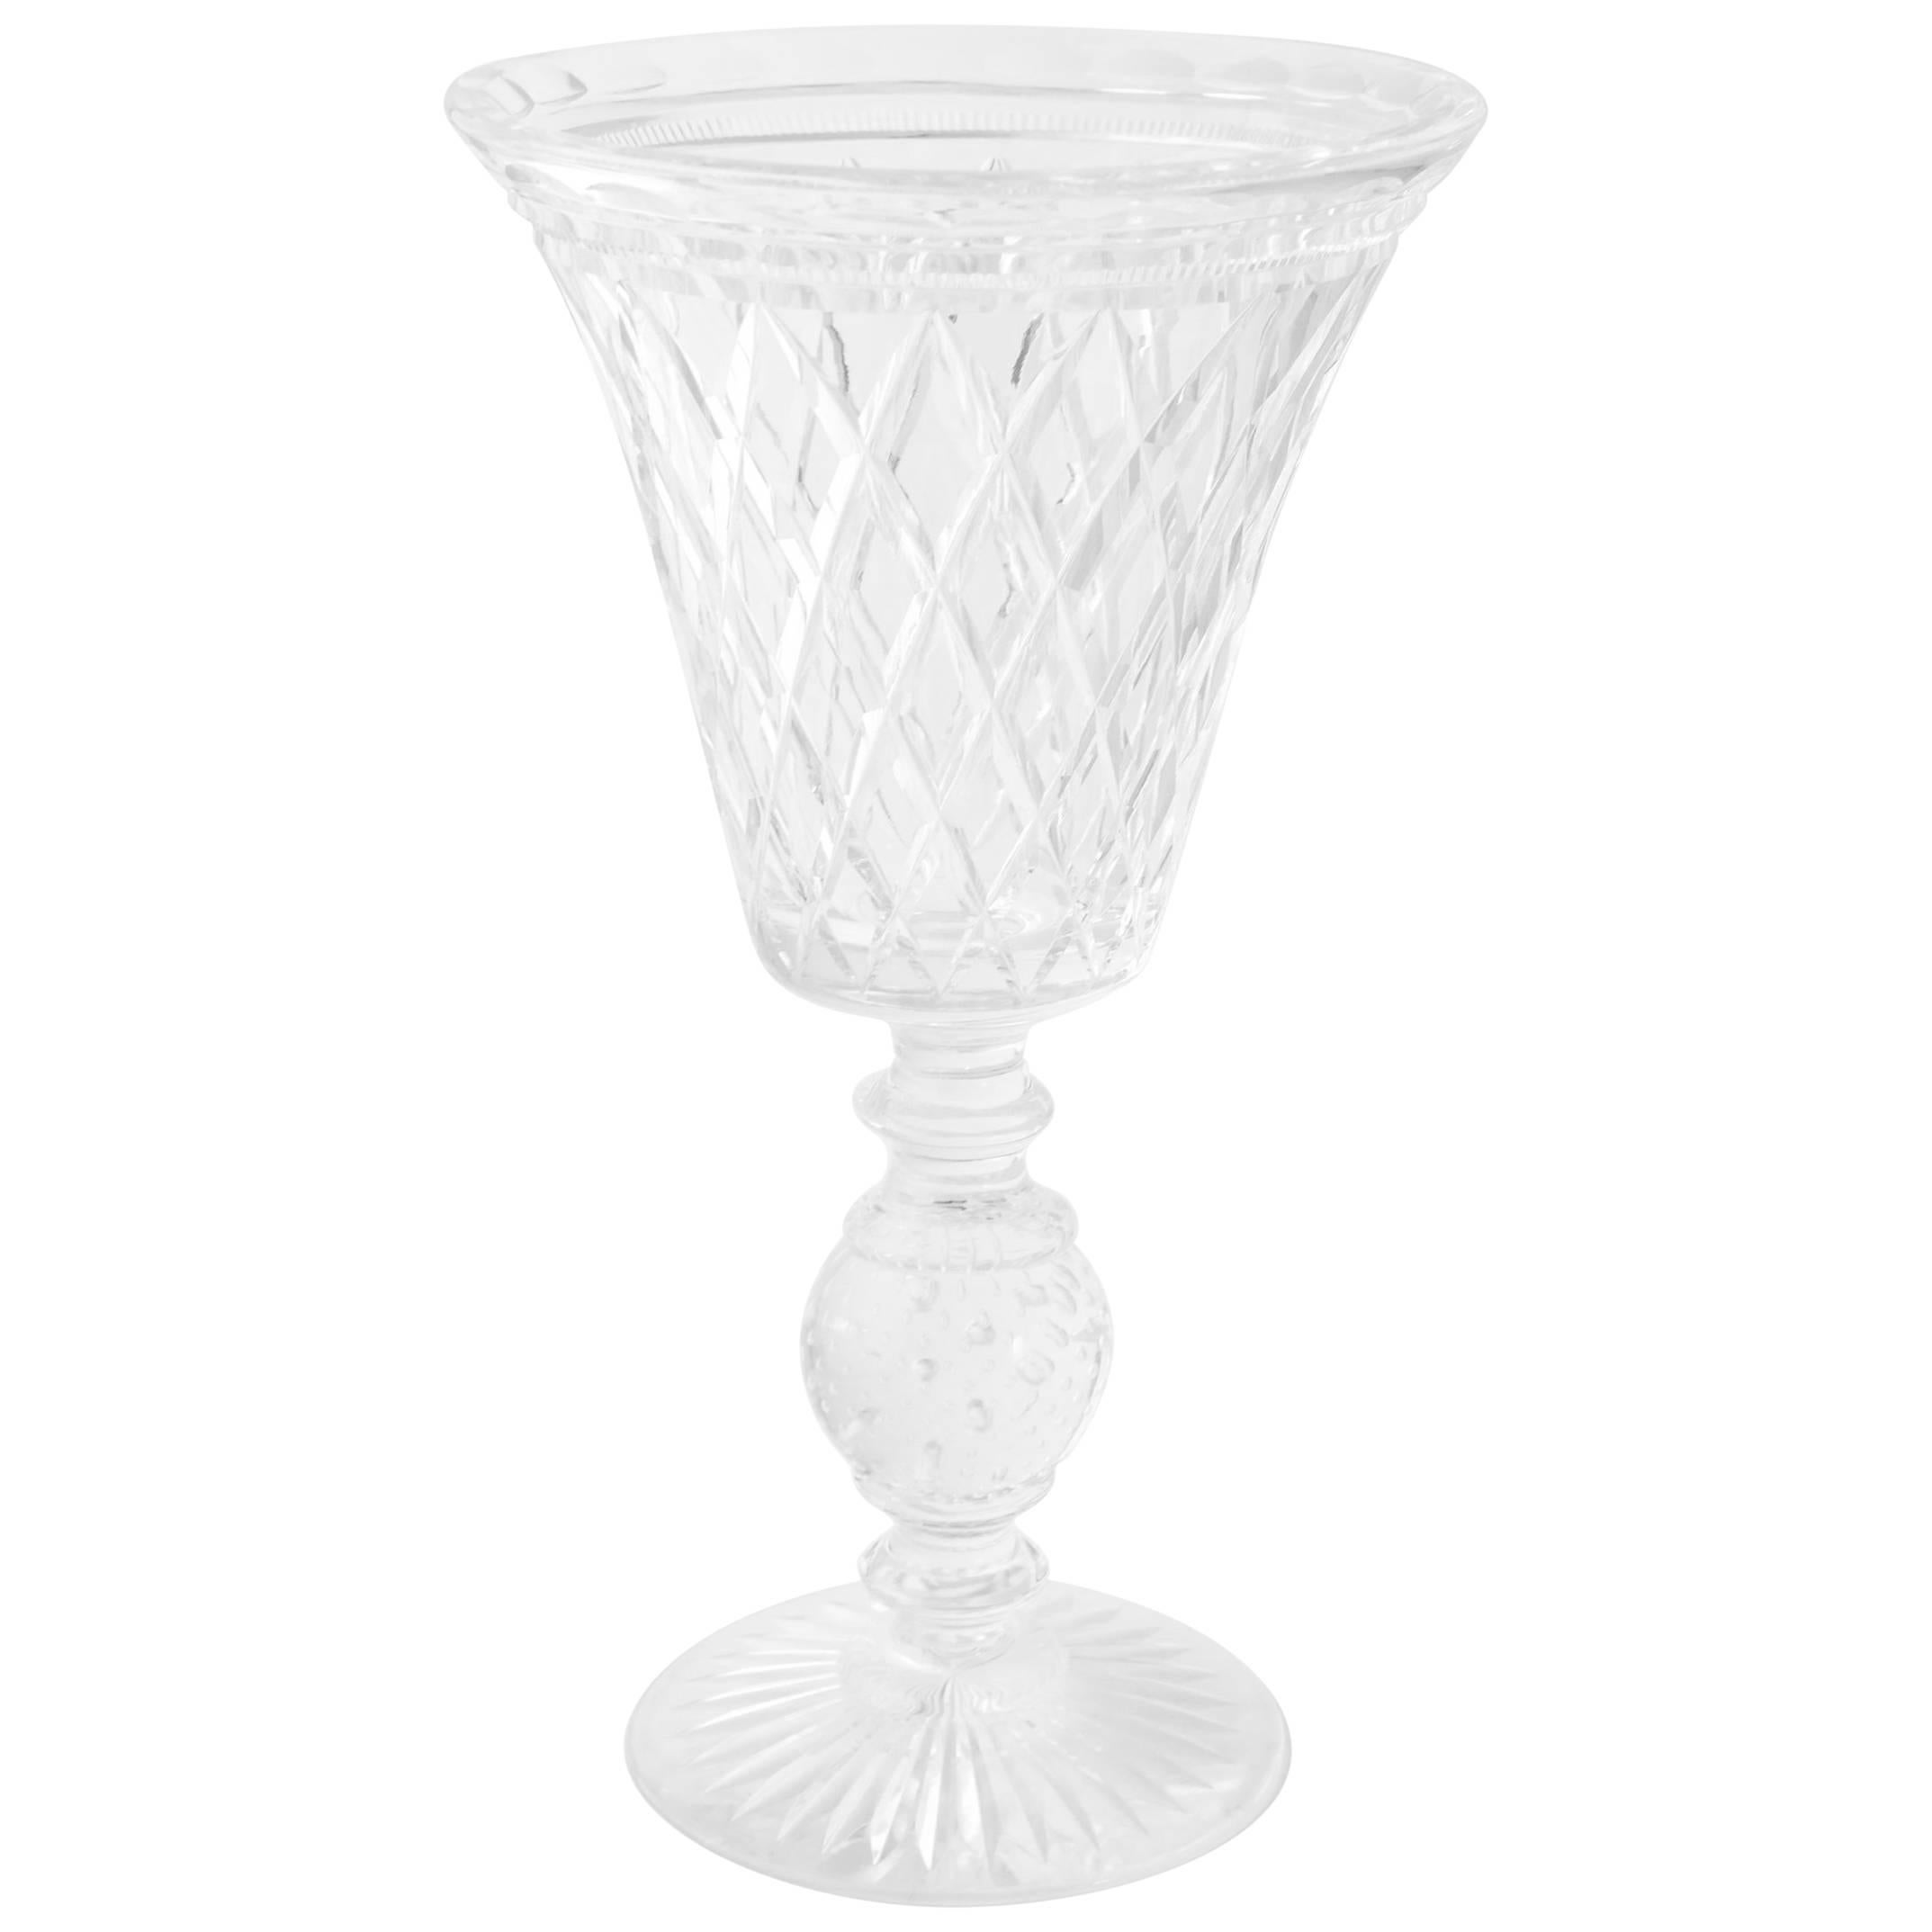 Large Mid 20th Century Chalice Shaped Cut-Glass Pairpoint Vase For Sale